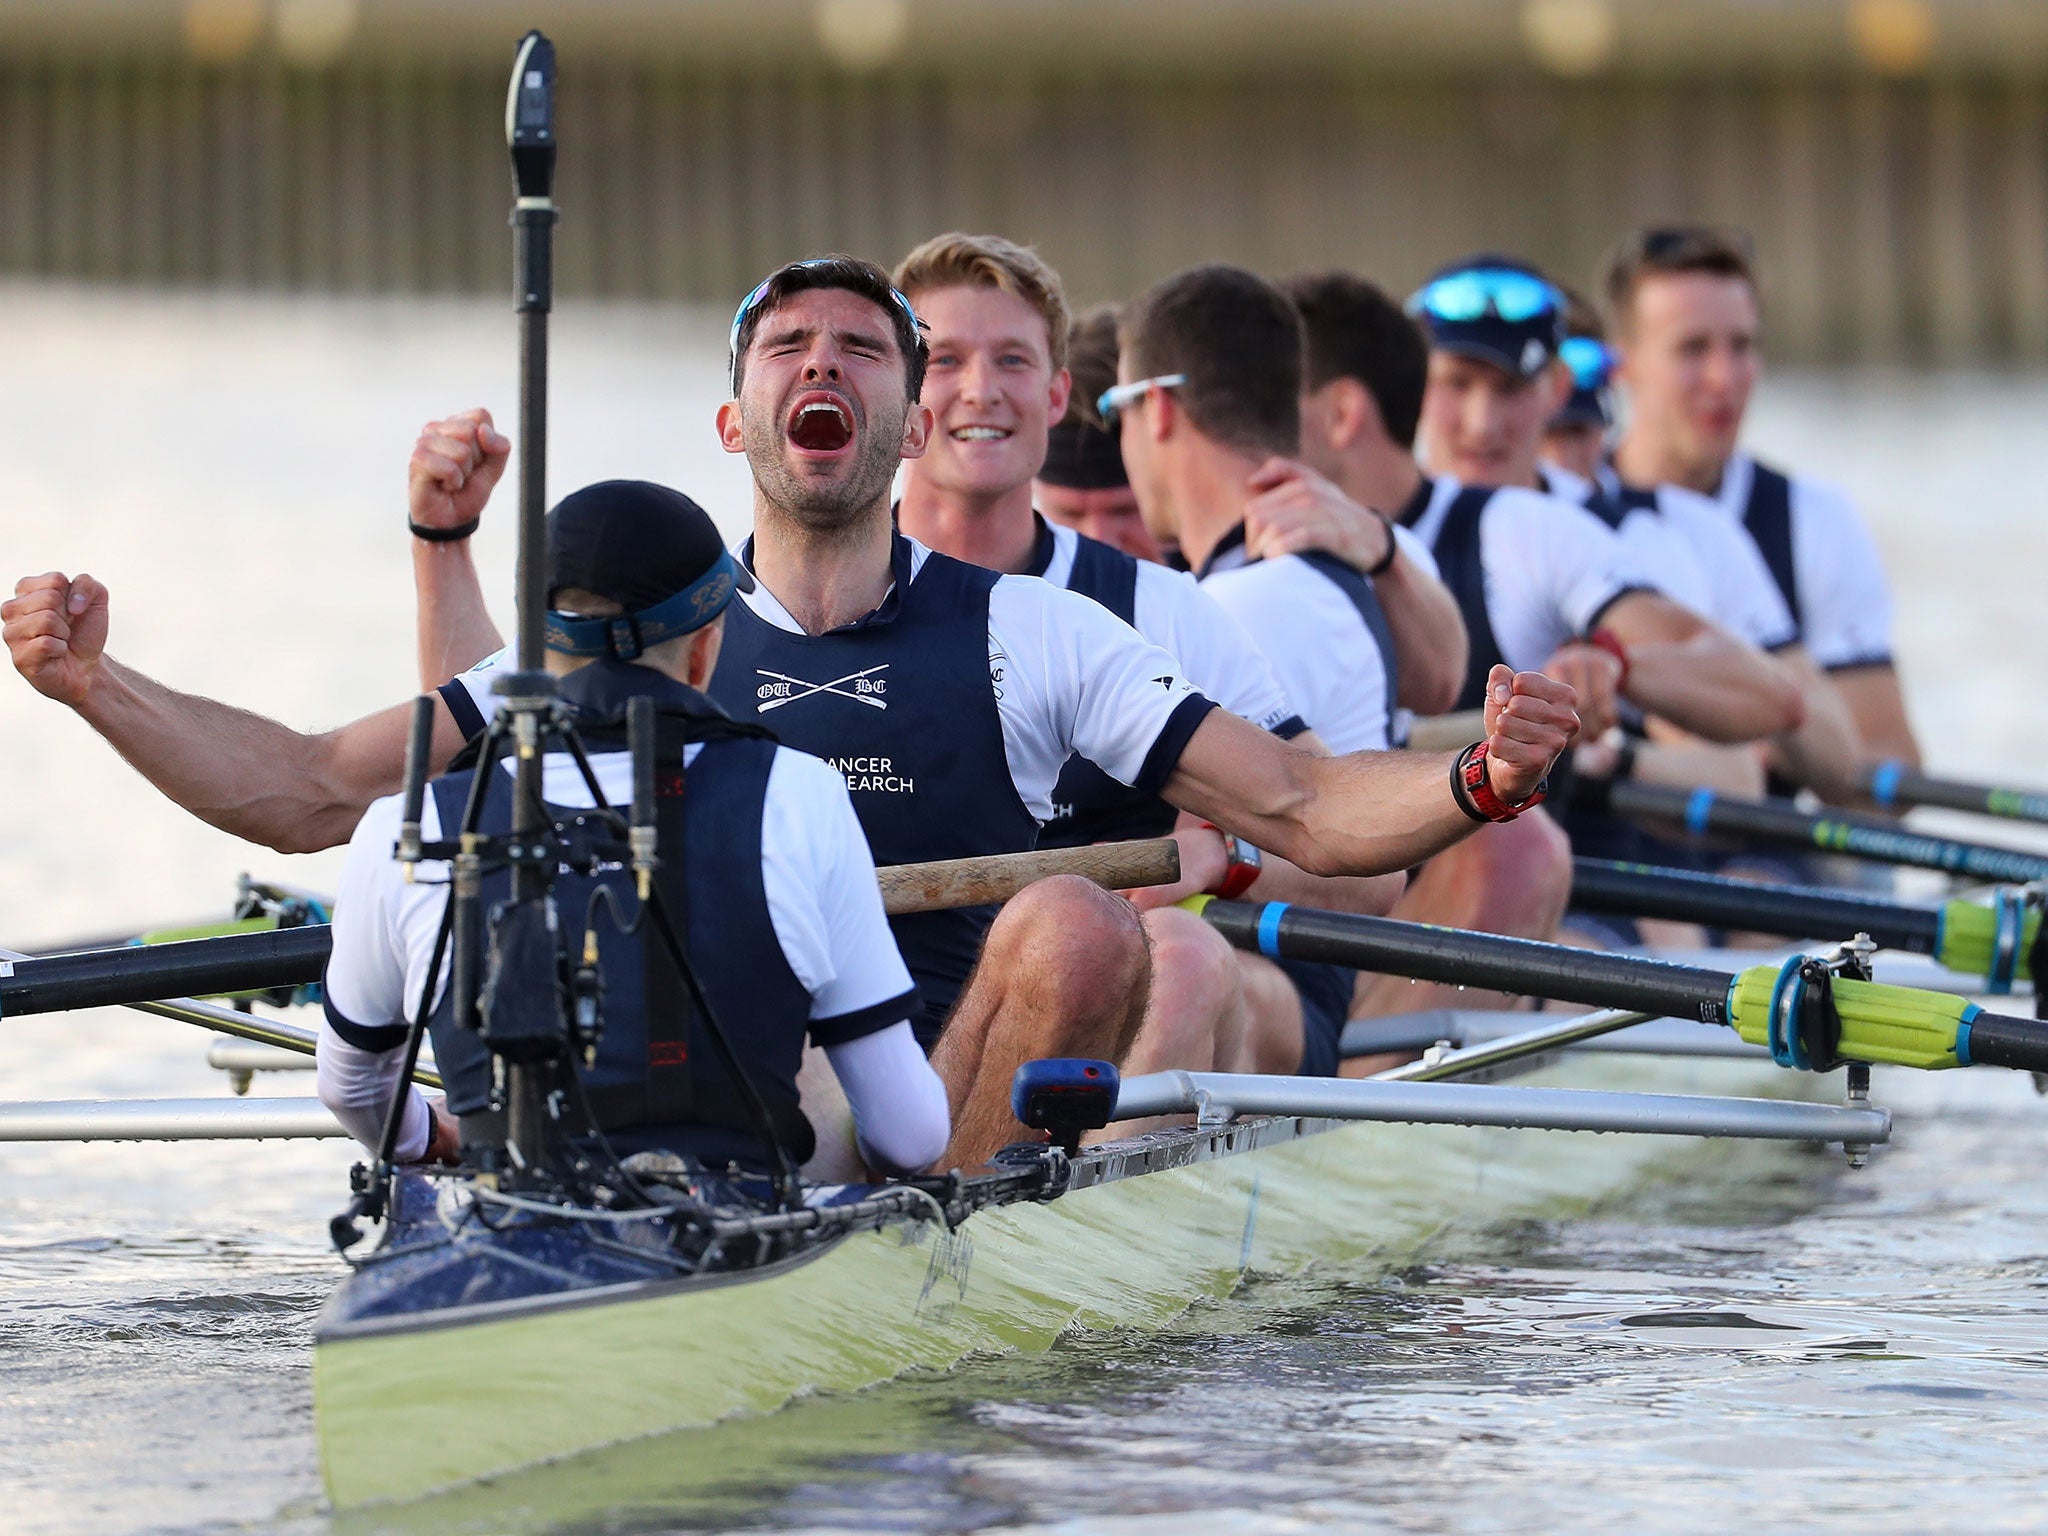 Oxford claimed victory in last year's race